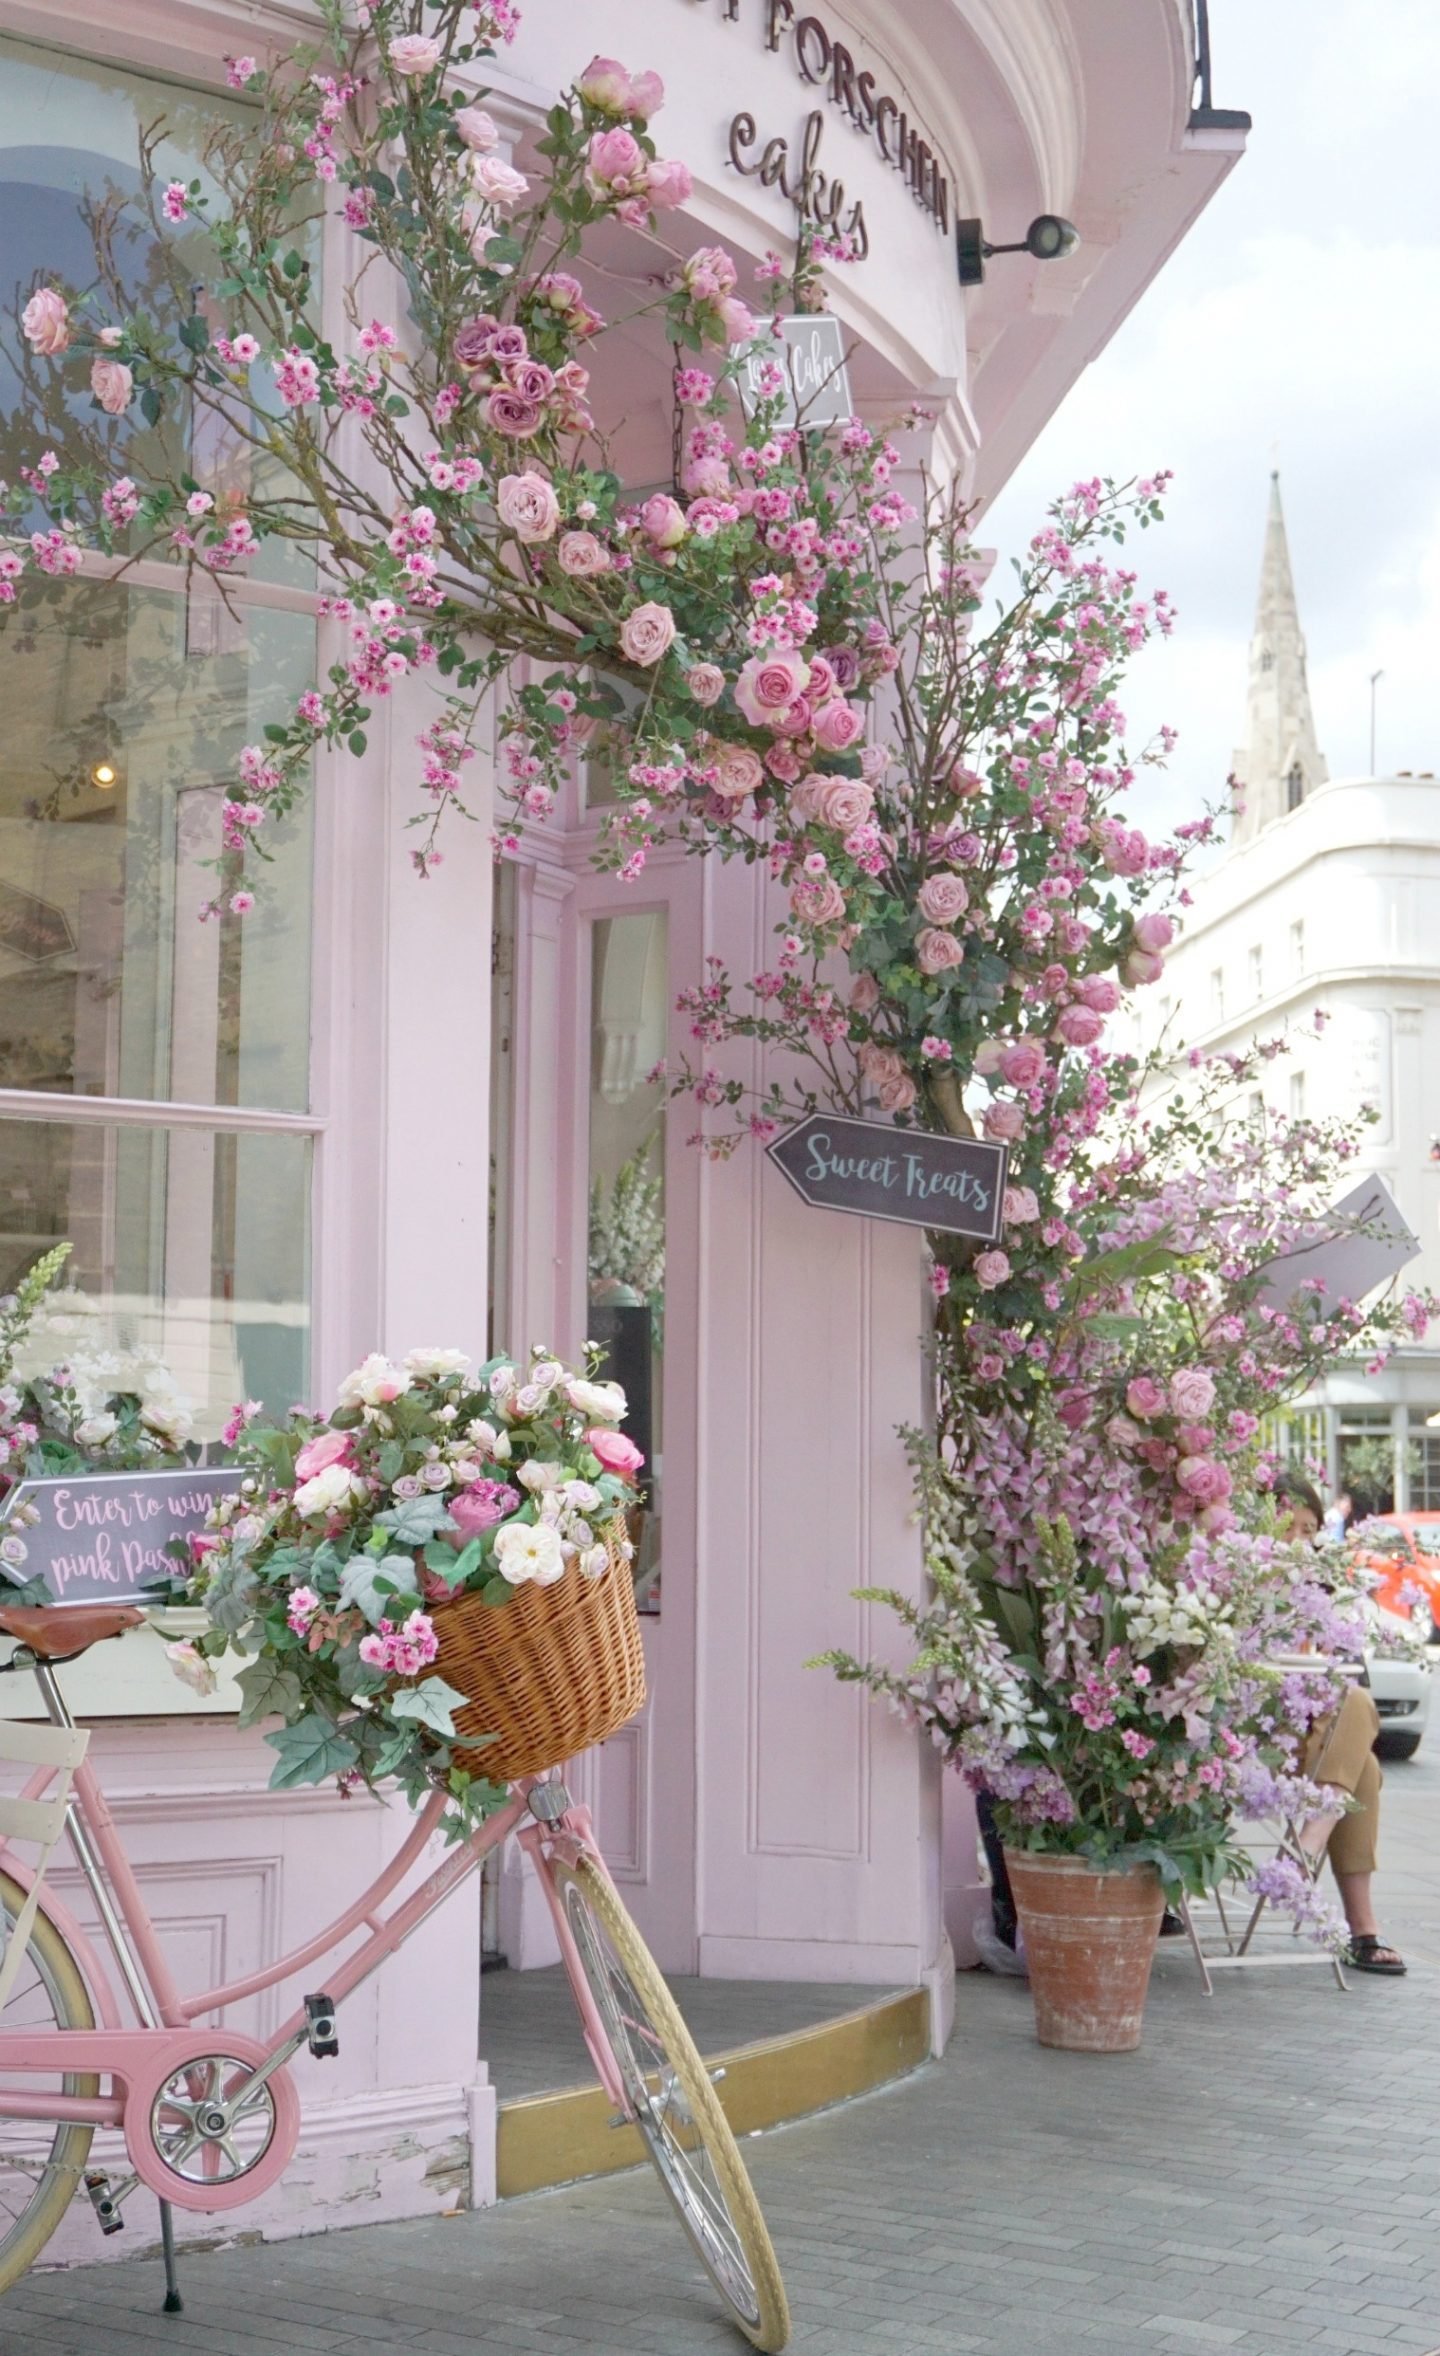 A London Photo Walk And Visions In Pink at Peggy Porschens In Belgravia And Notting Hill www.extraordinarychaos.com